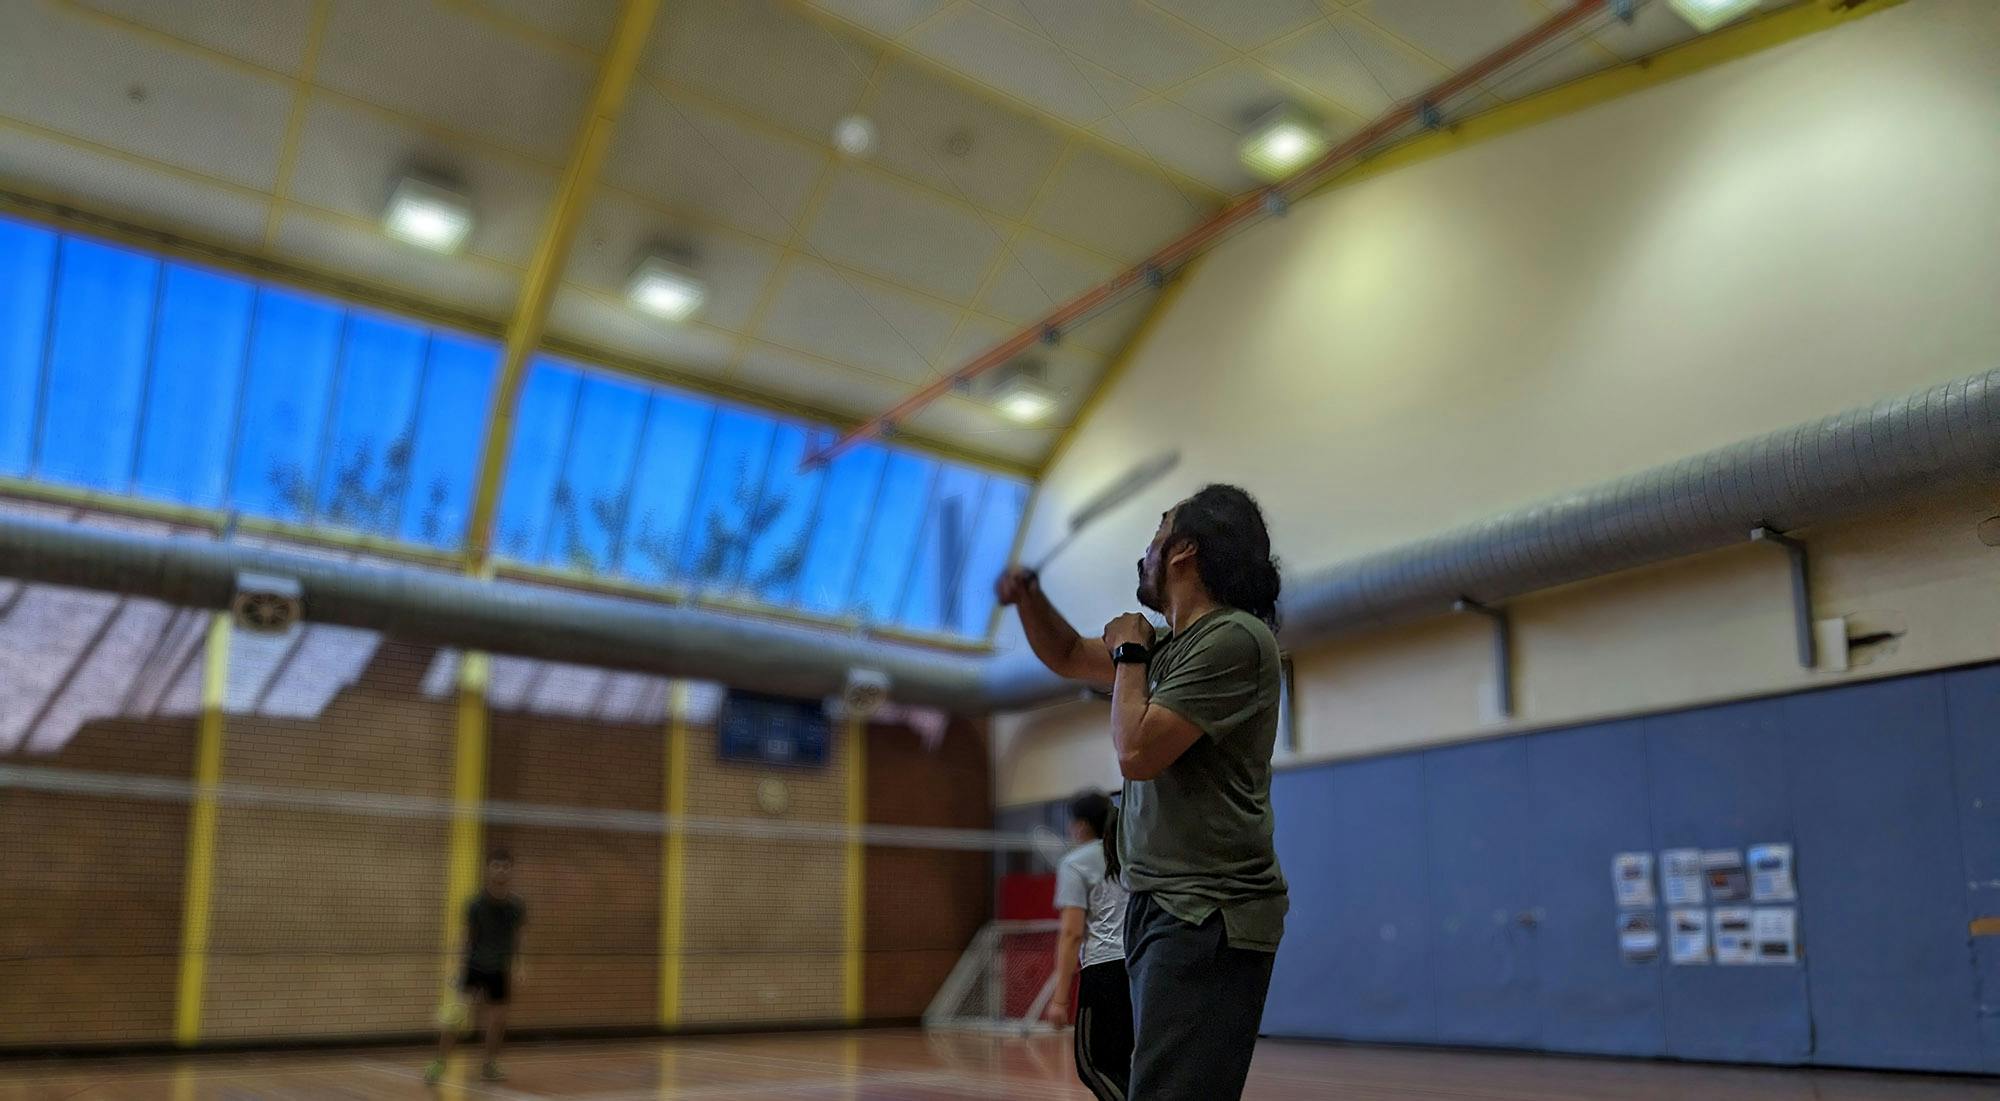 A game of Advanced Badminton at the Belconnen Community Centre